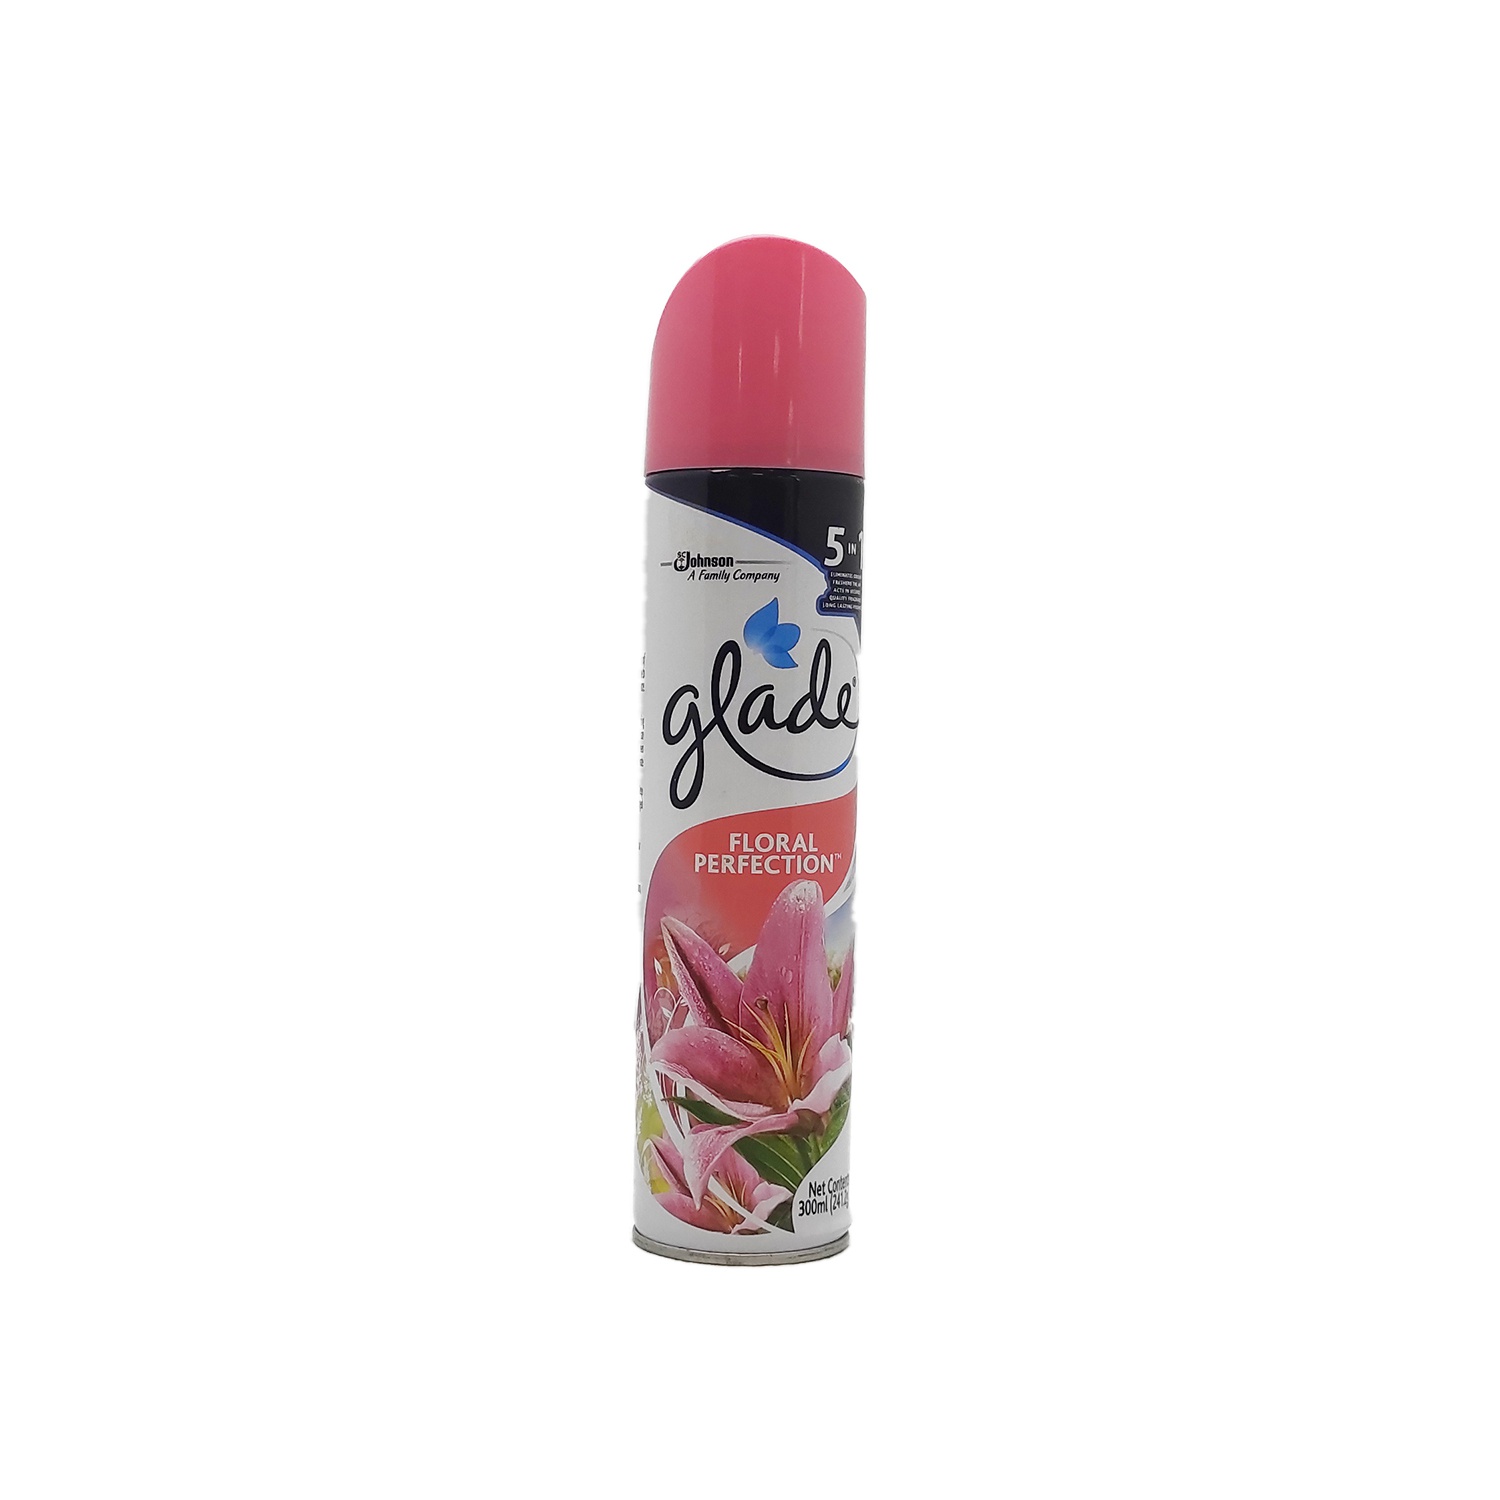 Glade Aerosol Air Freshener Floral Perfection 300Ml - GLADE - Cleaning Consumables - in Sri Lanka